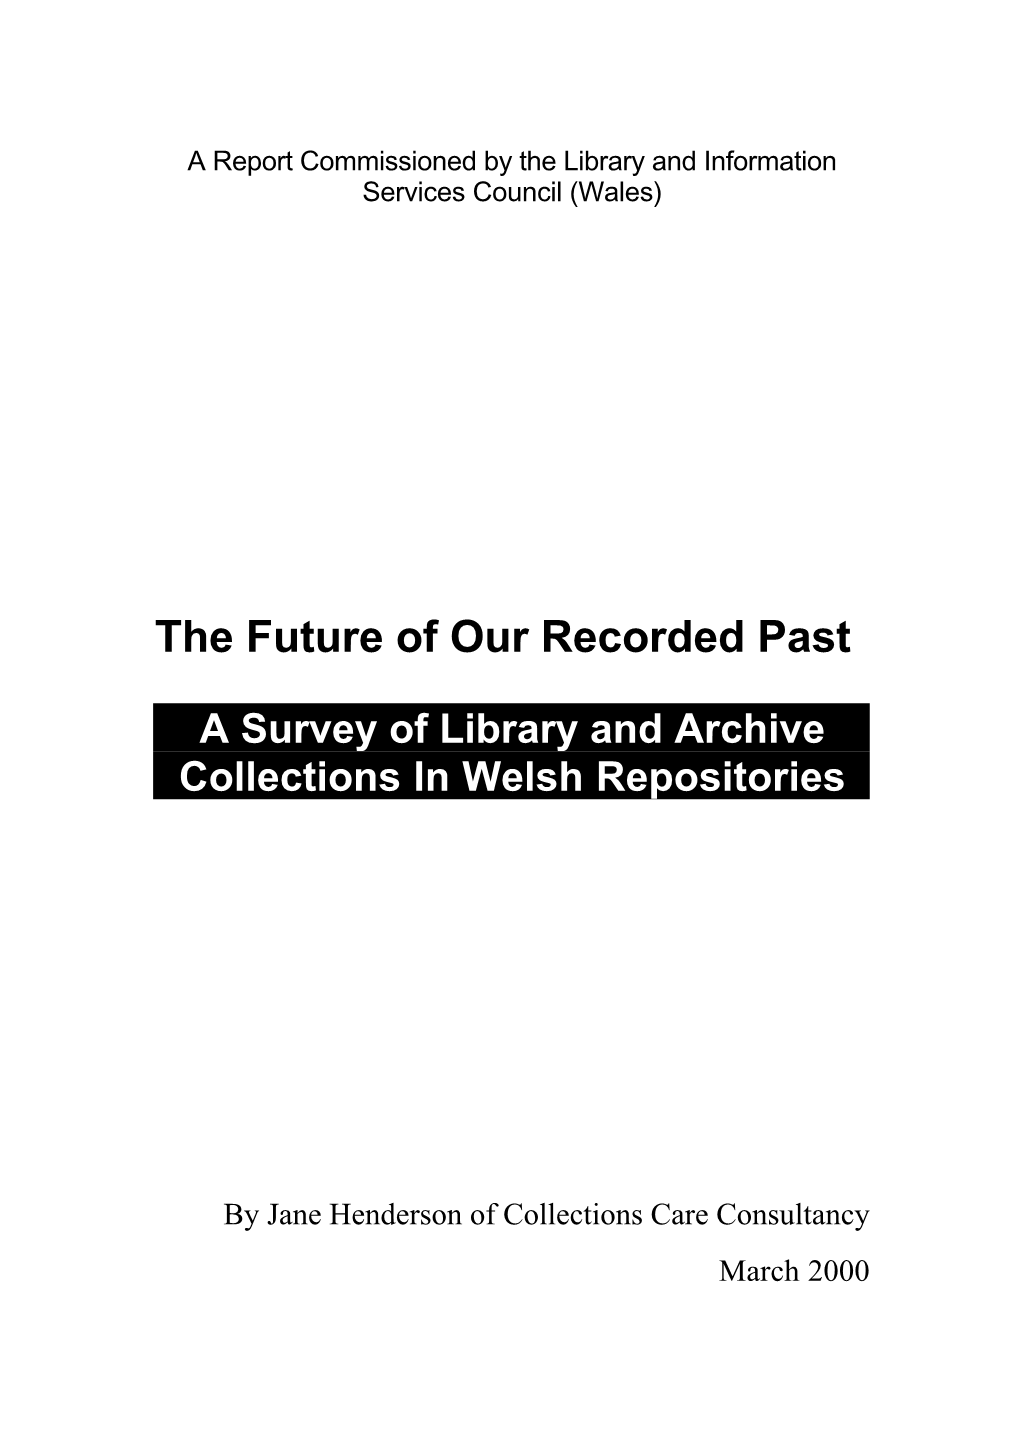 The Future of Our Recorded Past